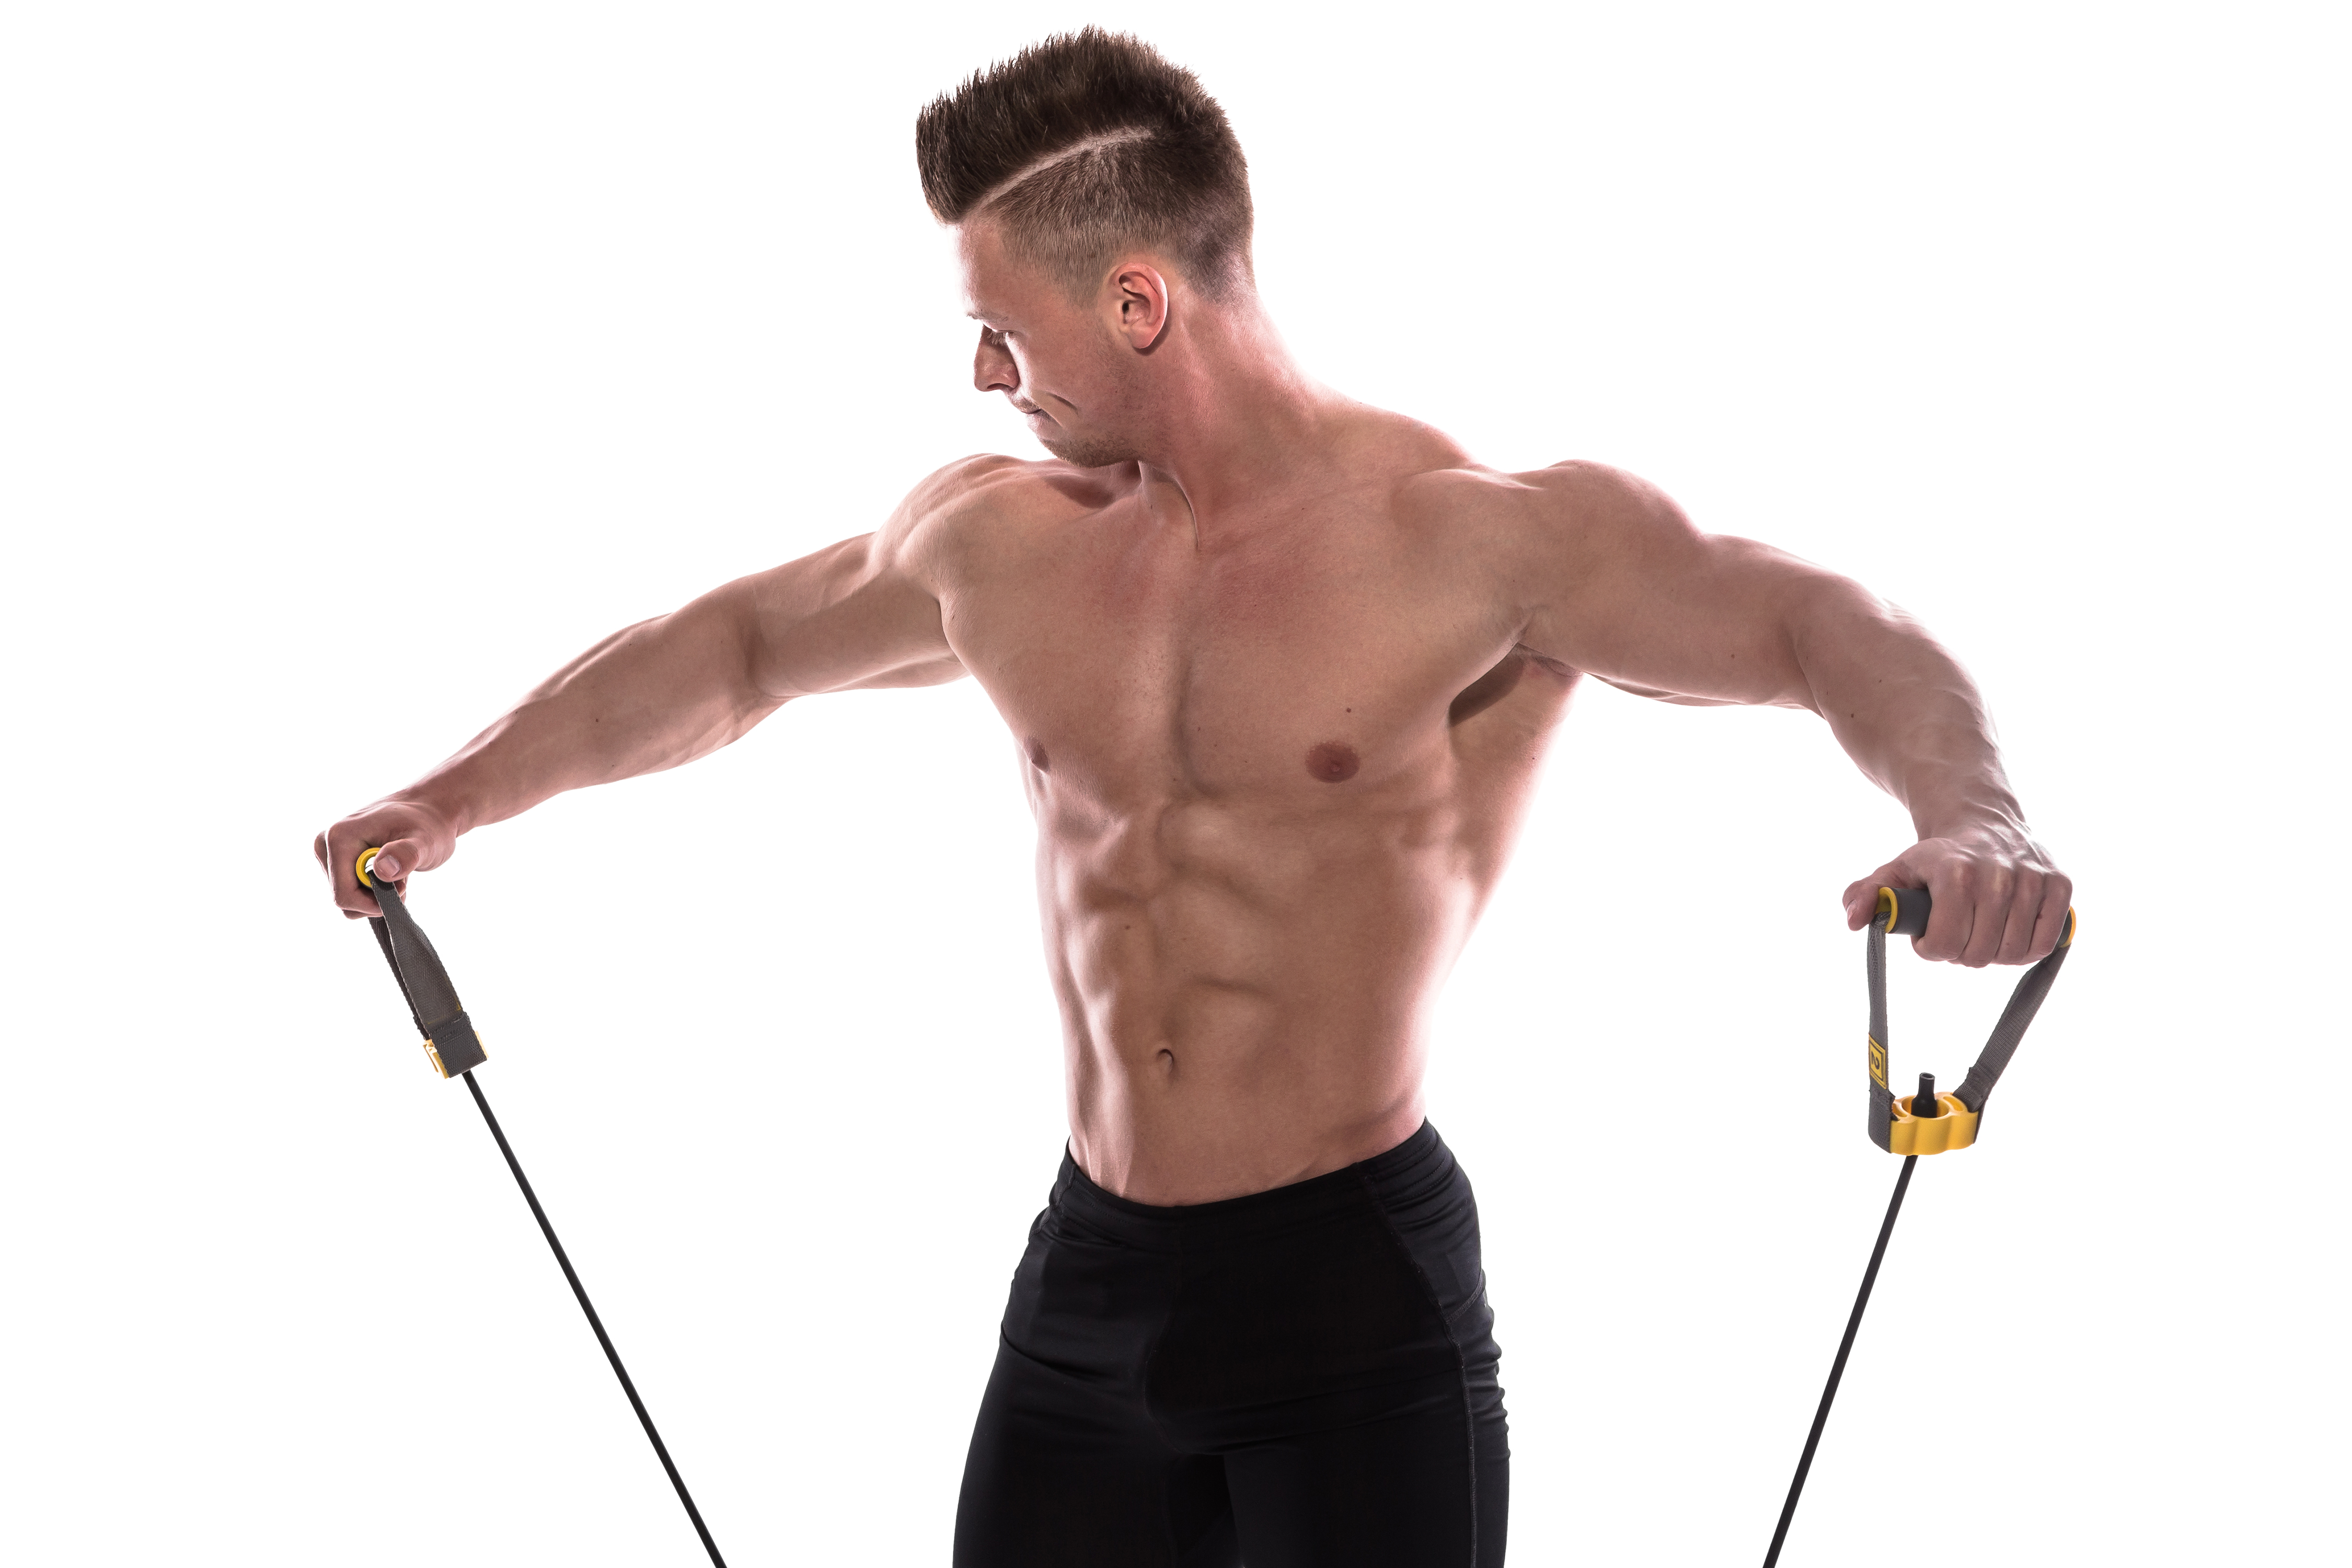 Bodybuilder working out with rubber band over white background